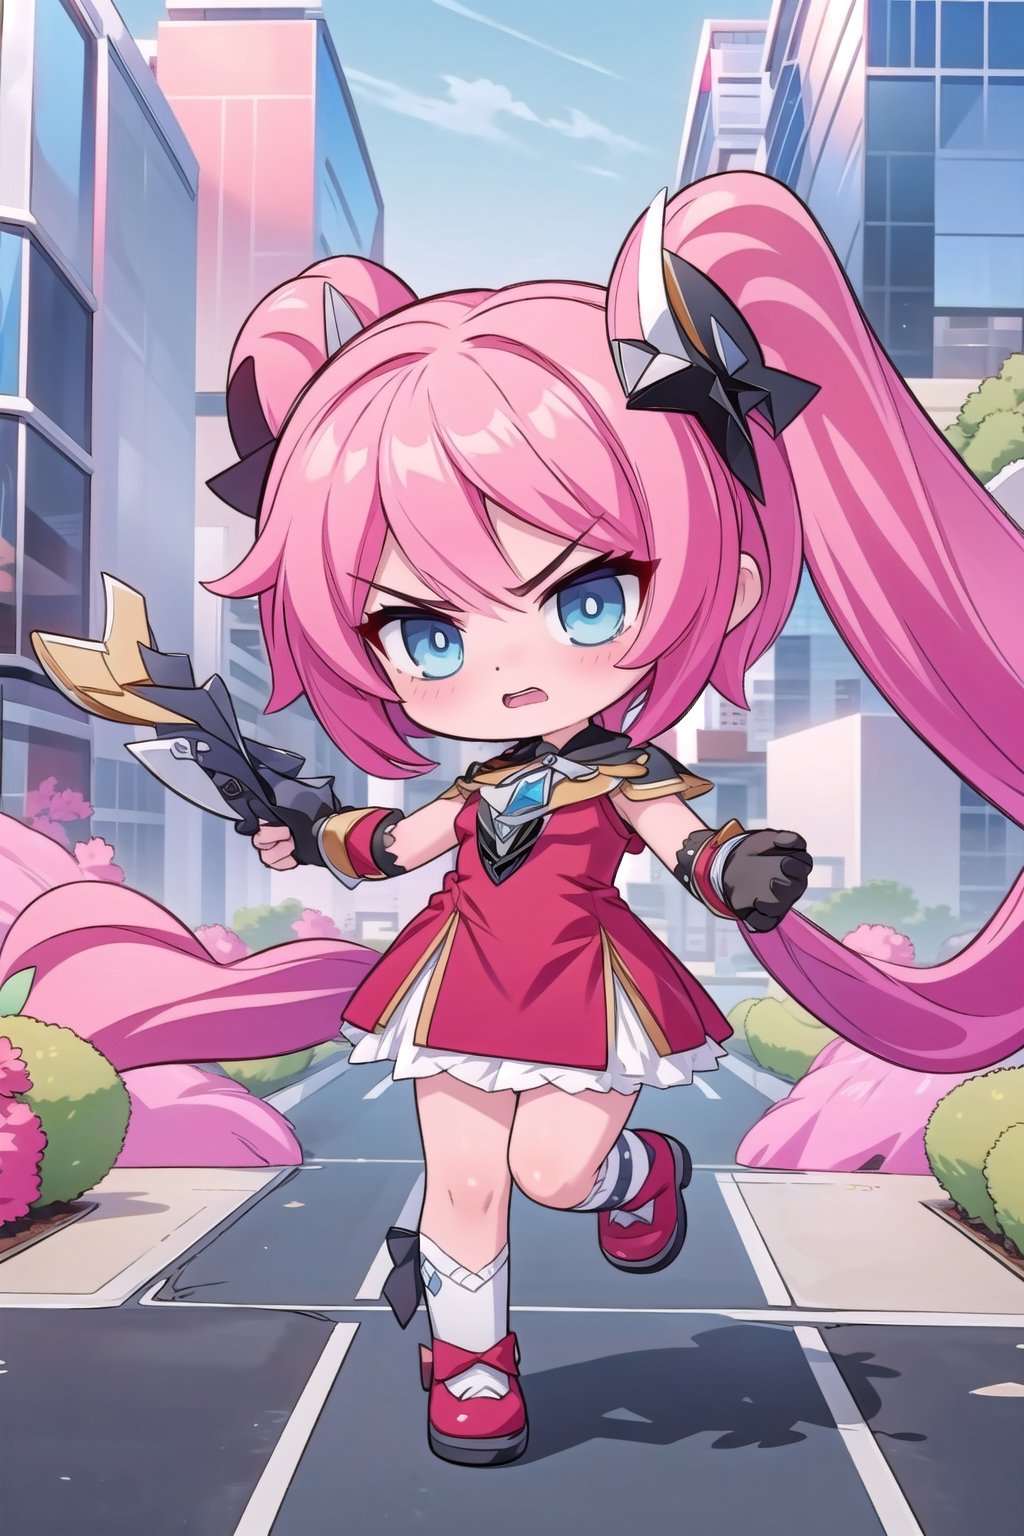 layla, star shaped blue eyes, pink hair, red dress, wannabe, angry open mouth, genshin chibi emote